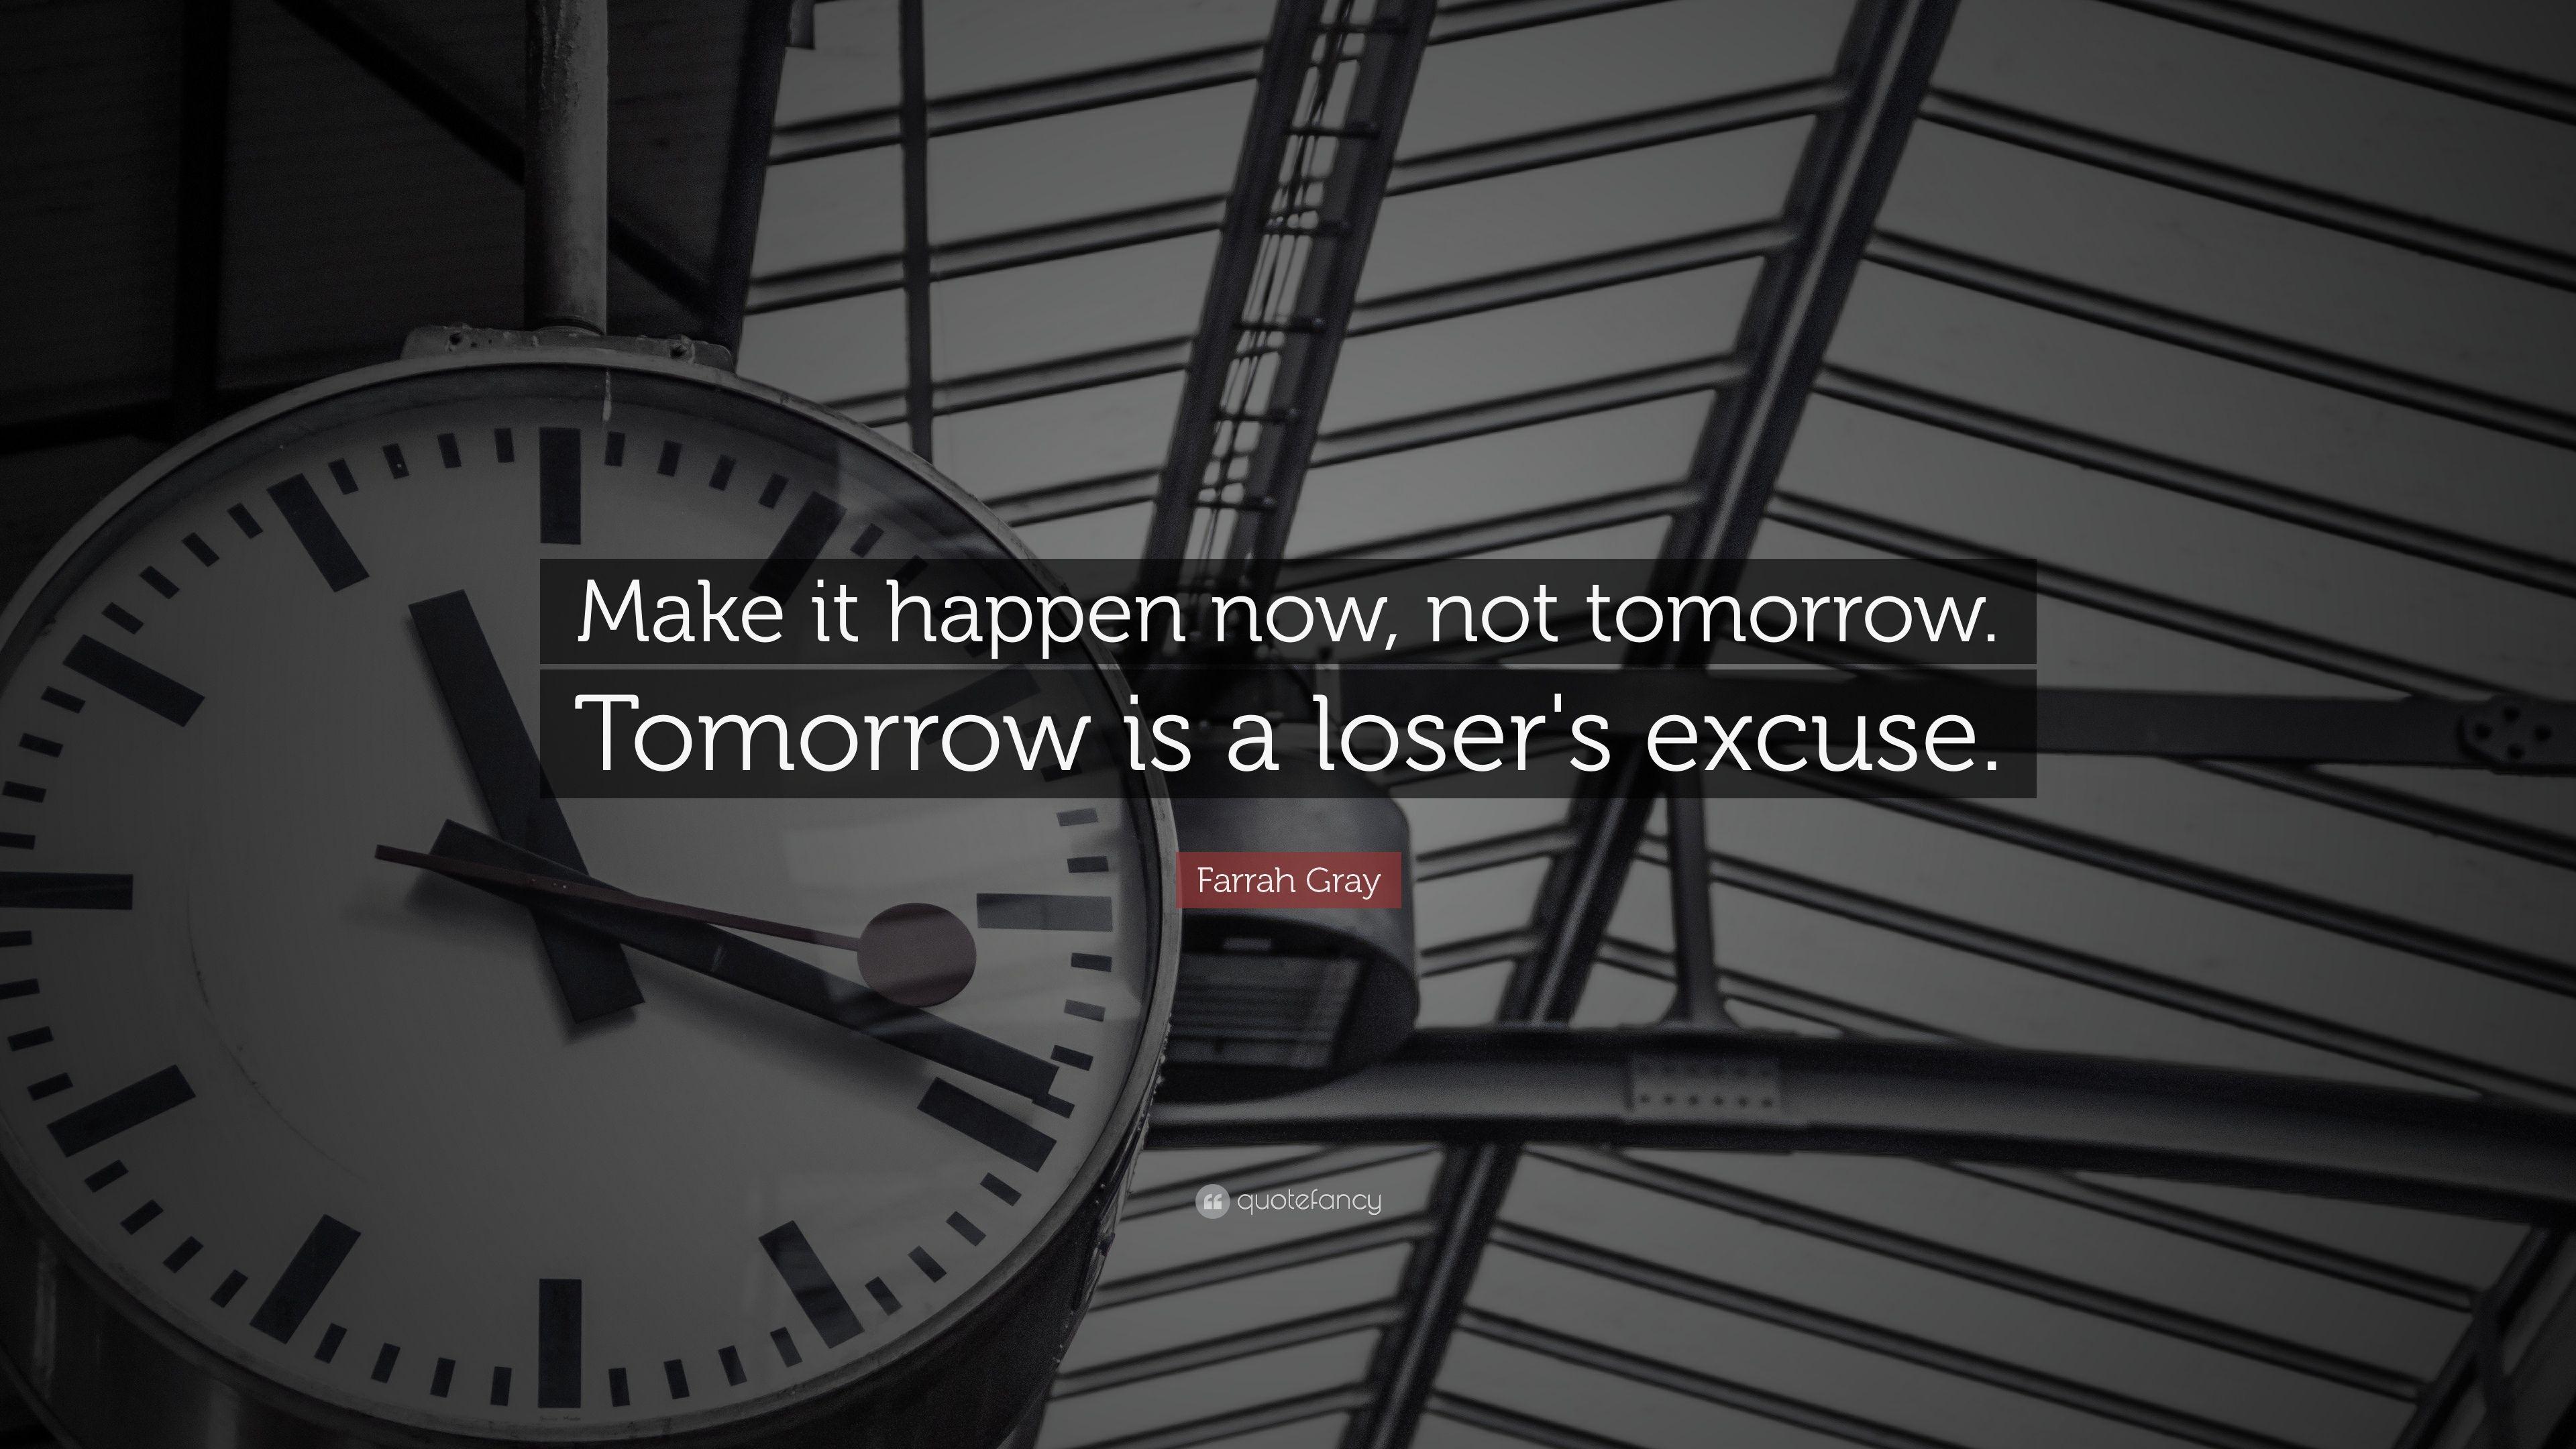 Farrah Gray Quote: “Make it happen now, not tomorrow. Tomorrow is